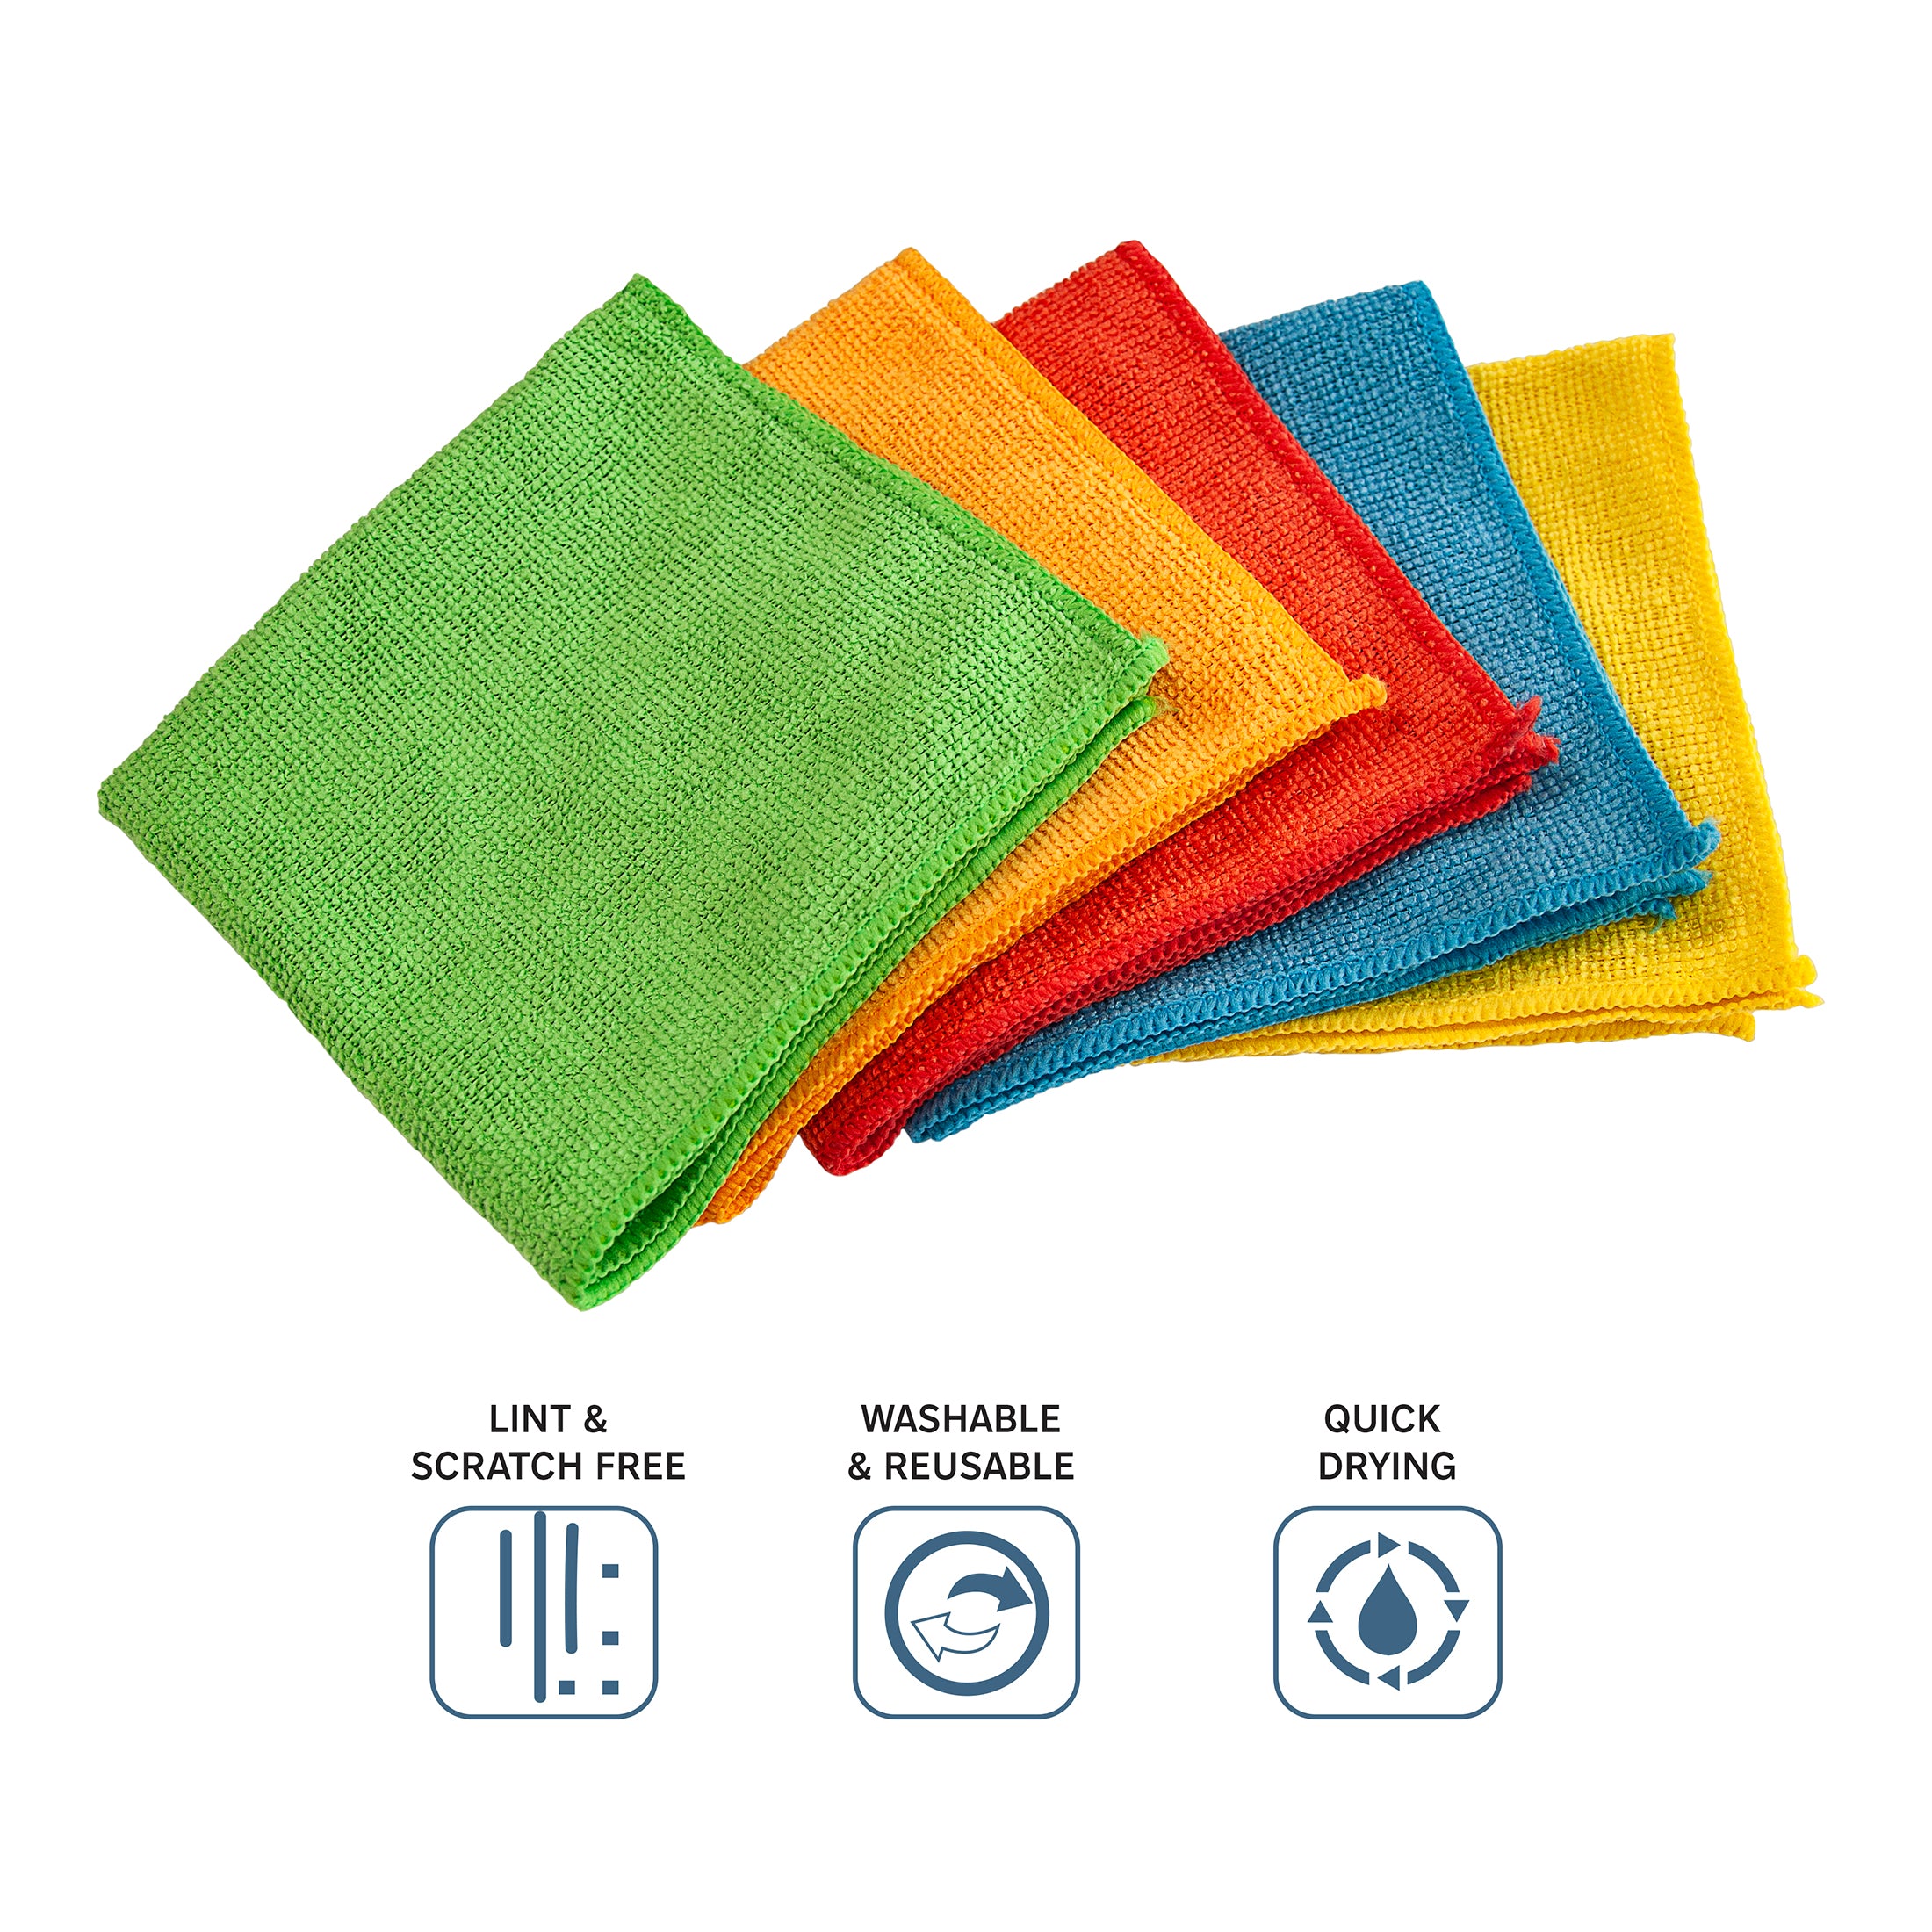 https://www.eurow.com/cdn/shop/products/5-color_20utility_20towels_20w_20icons.jpg?v=1679598605